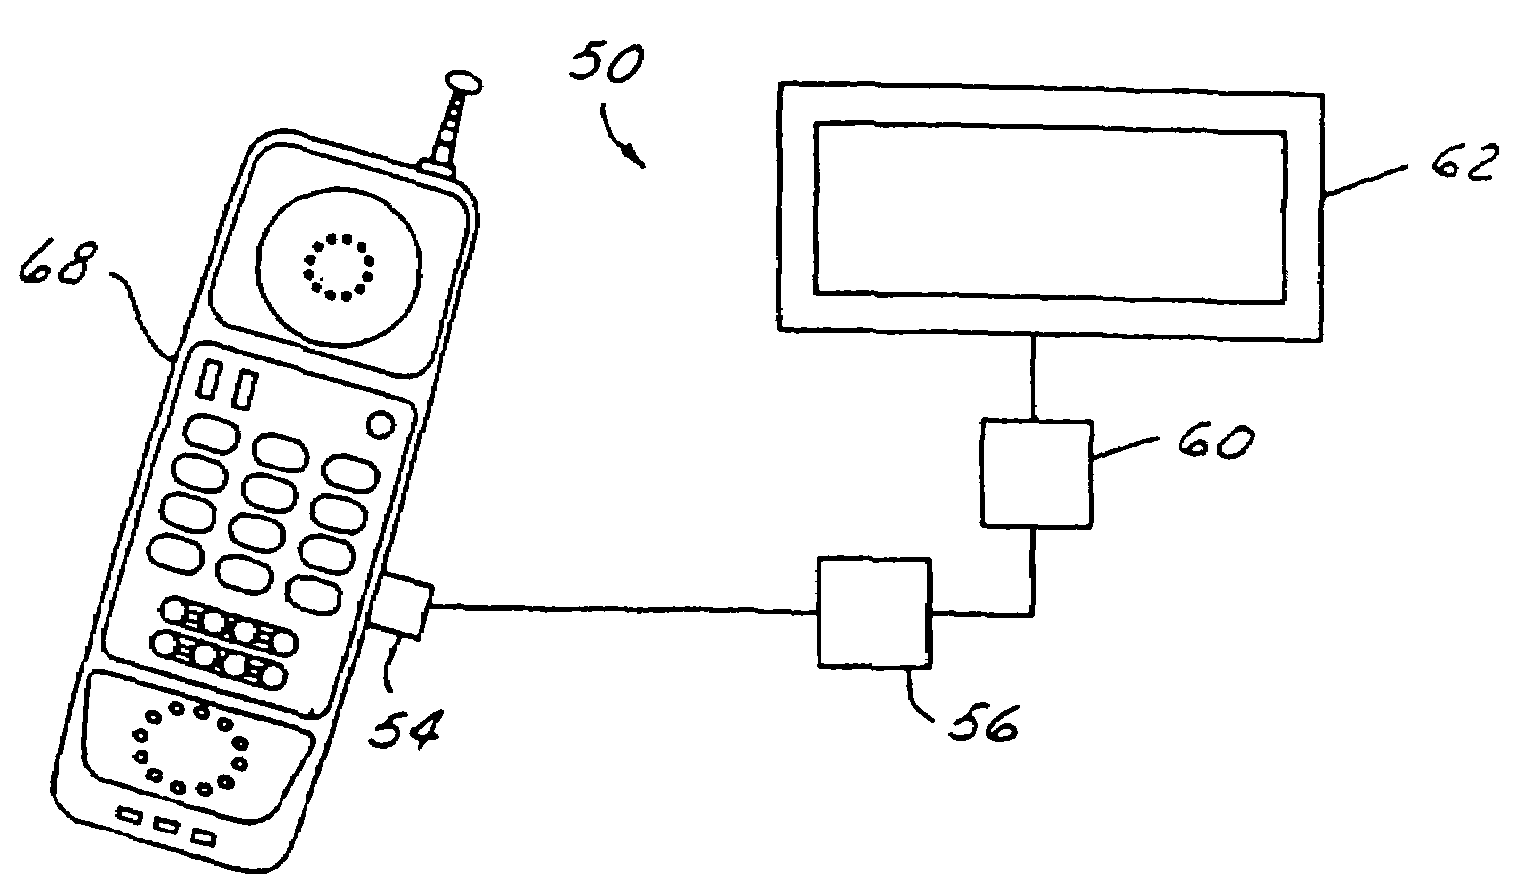 Broadband communication system for mobile users in a satellite-based network